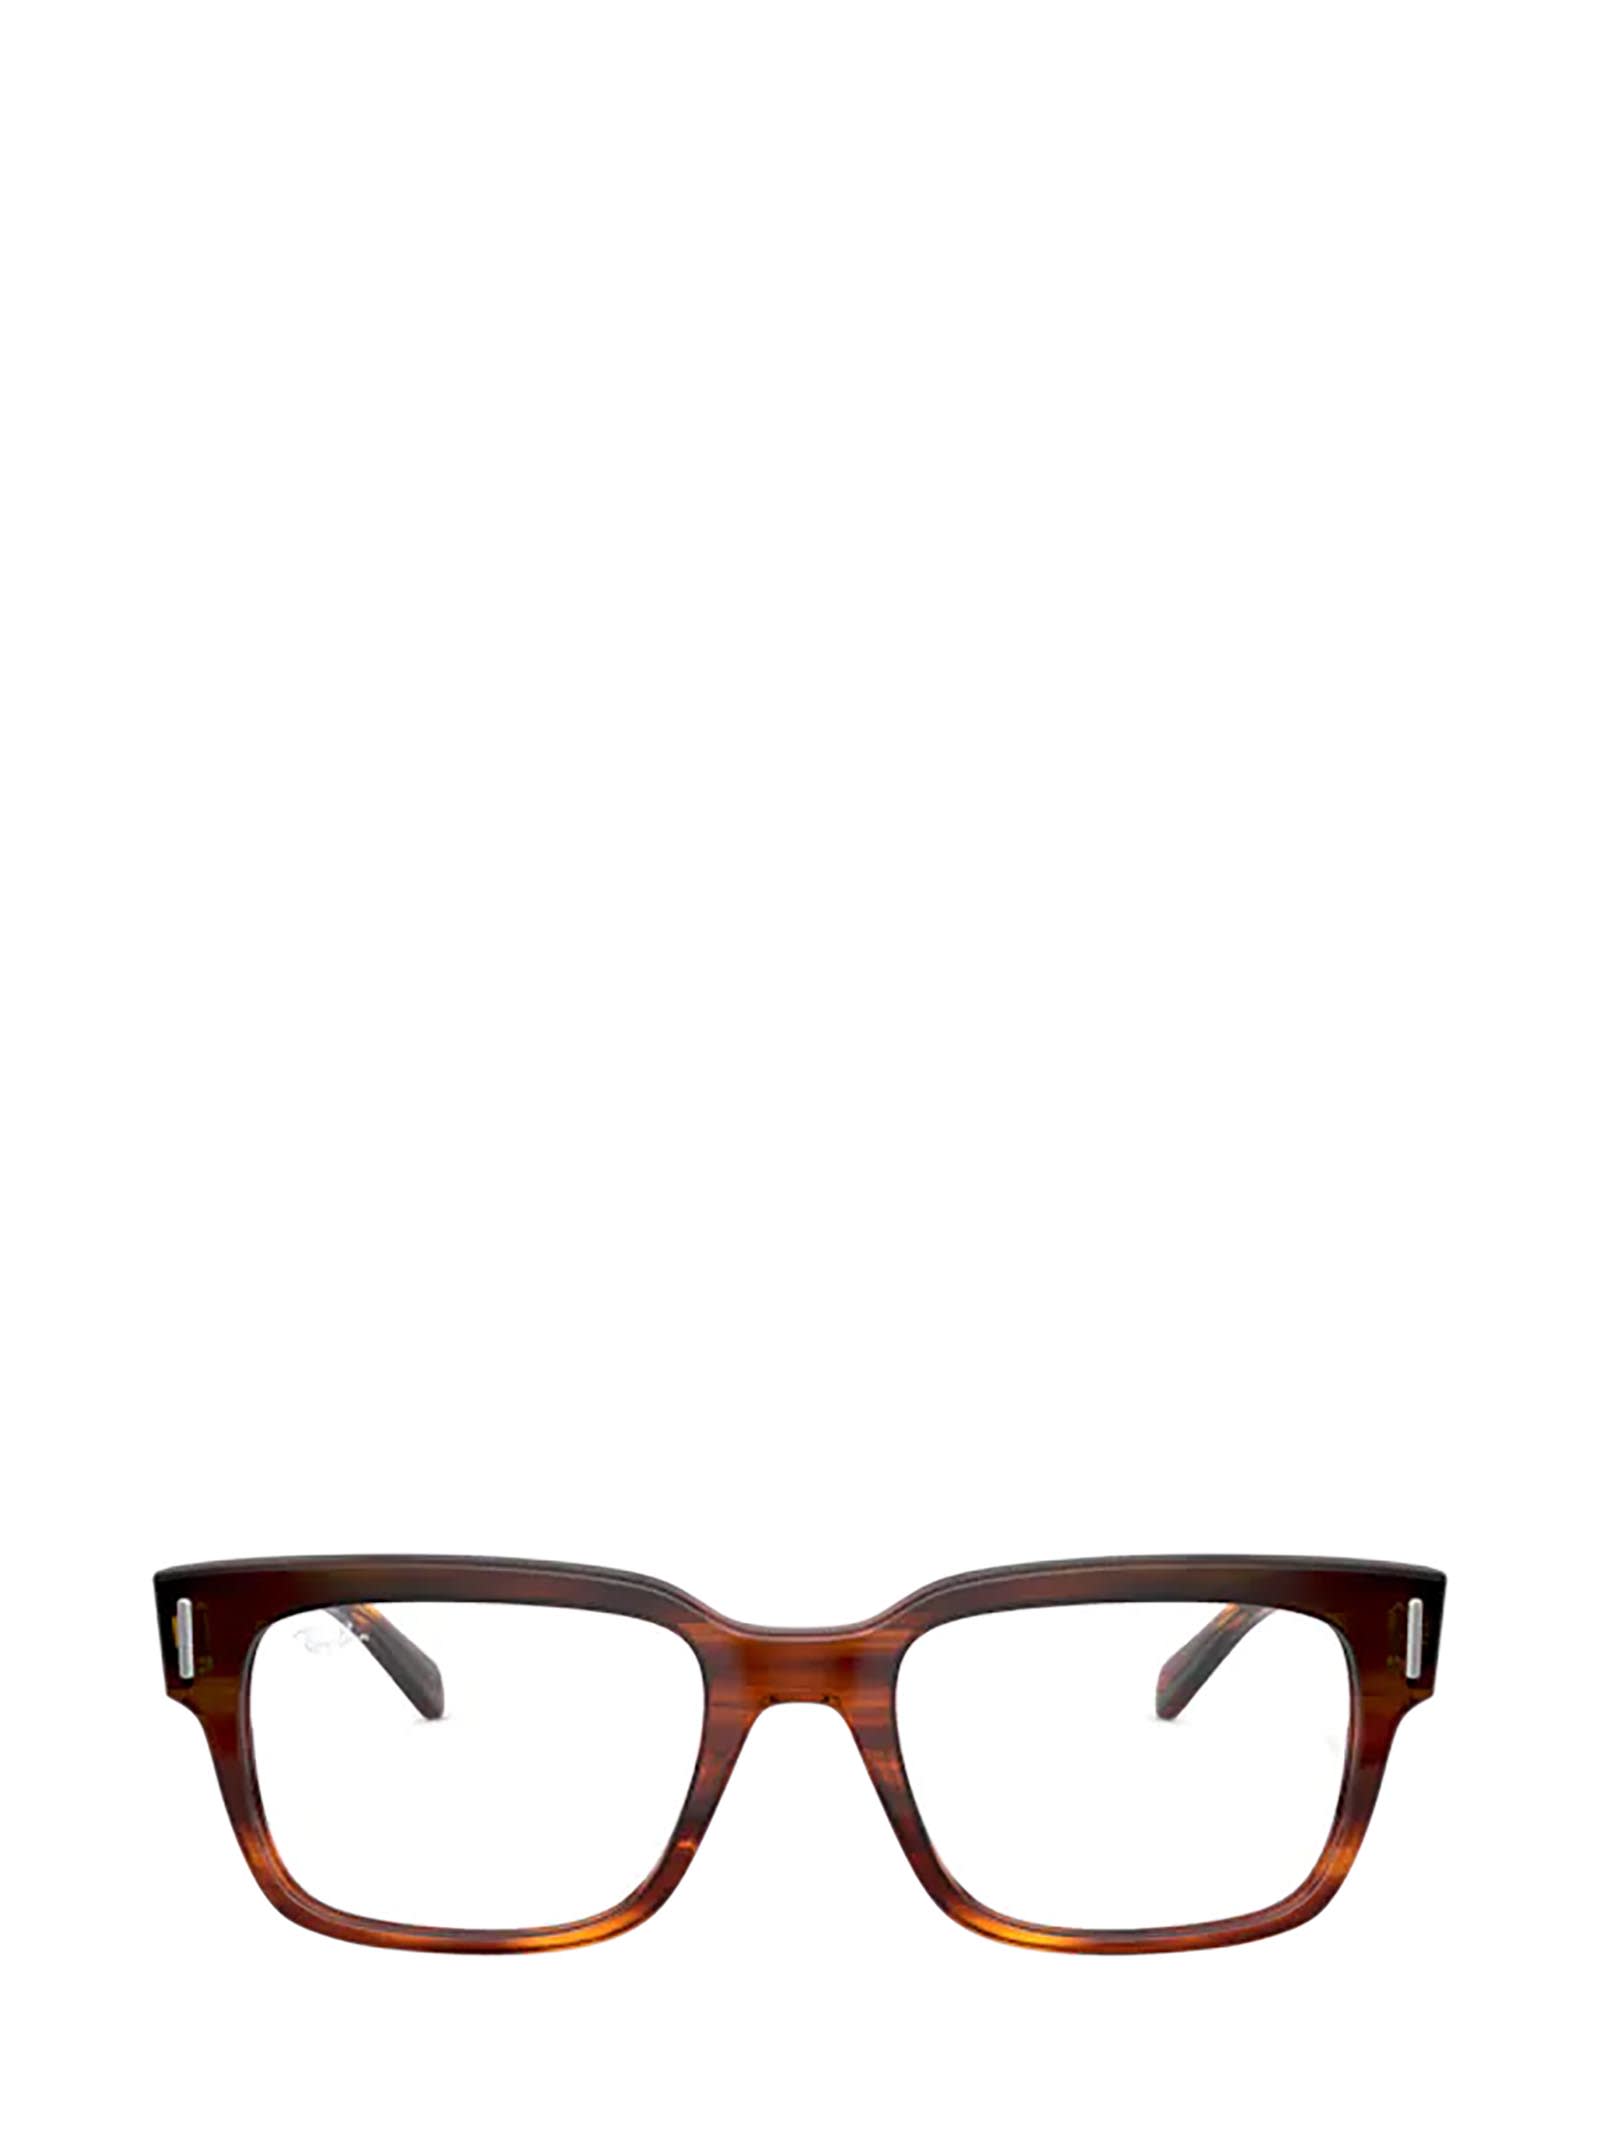 RAY BAN RAY-BAN RX5388 STRIPED RED HAVANA GLASSES,RX5388 2144